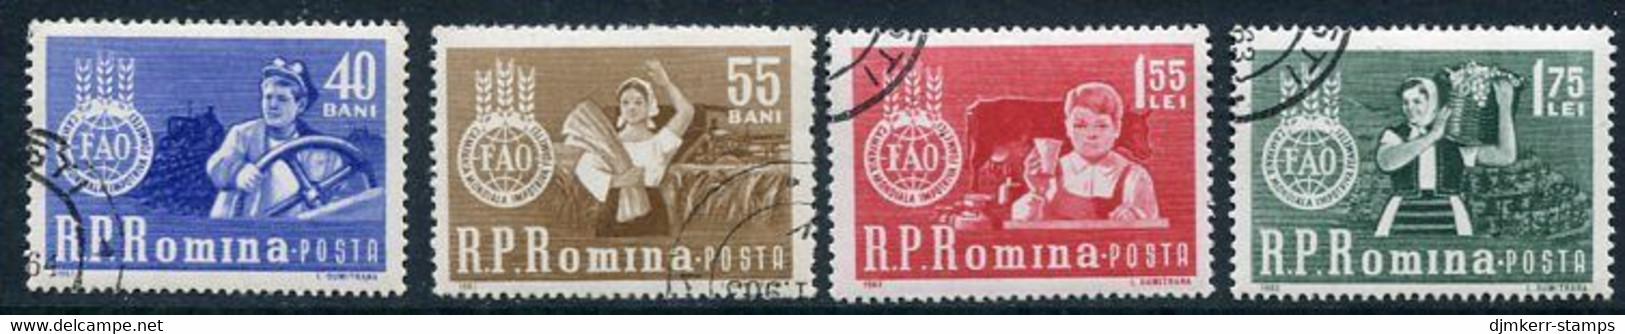 ROMANIA 1963  Freedom From Hunger Used  Michel 2126-29 - Usati